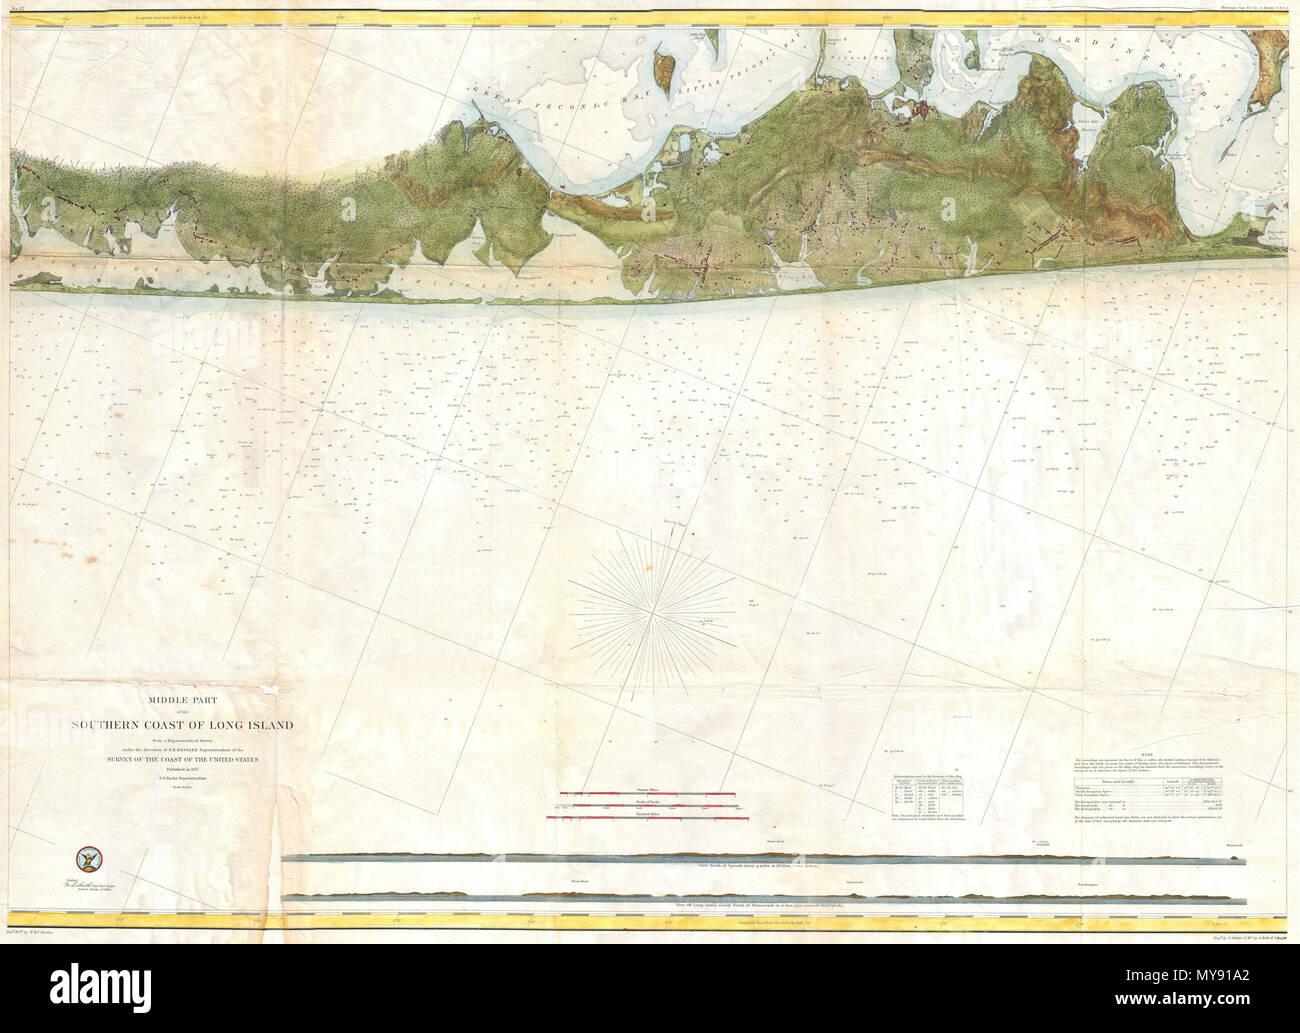 . Middle Part of the Southern Coast of Long Island.  English: This is an extraordinary and extremely rare hand colored large format 1857 U.S. Coast Survey sea chart or map depicting southeastern Long Island, New York. Details part of Suffolk County from Moriches Bay to Napeague Harbor, including the summer getaways of Sag Harbor, East Hampton, Southampton (South Hampton), Quogue, Bridgehampton and Amagansett, among others. Extends as far north as Gardiner’s Island and Hog Neck. Inland regions are depicted in considerable detail, down to individual buildings. In addition to inland details, this Stock Photo